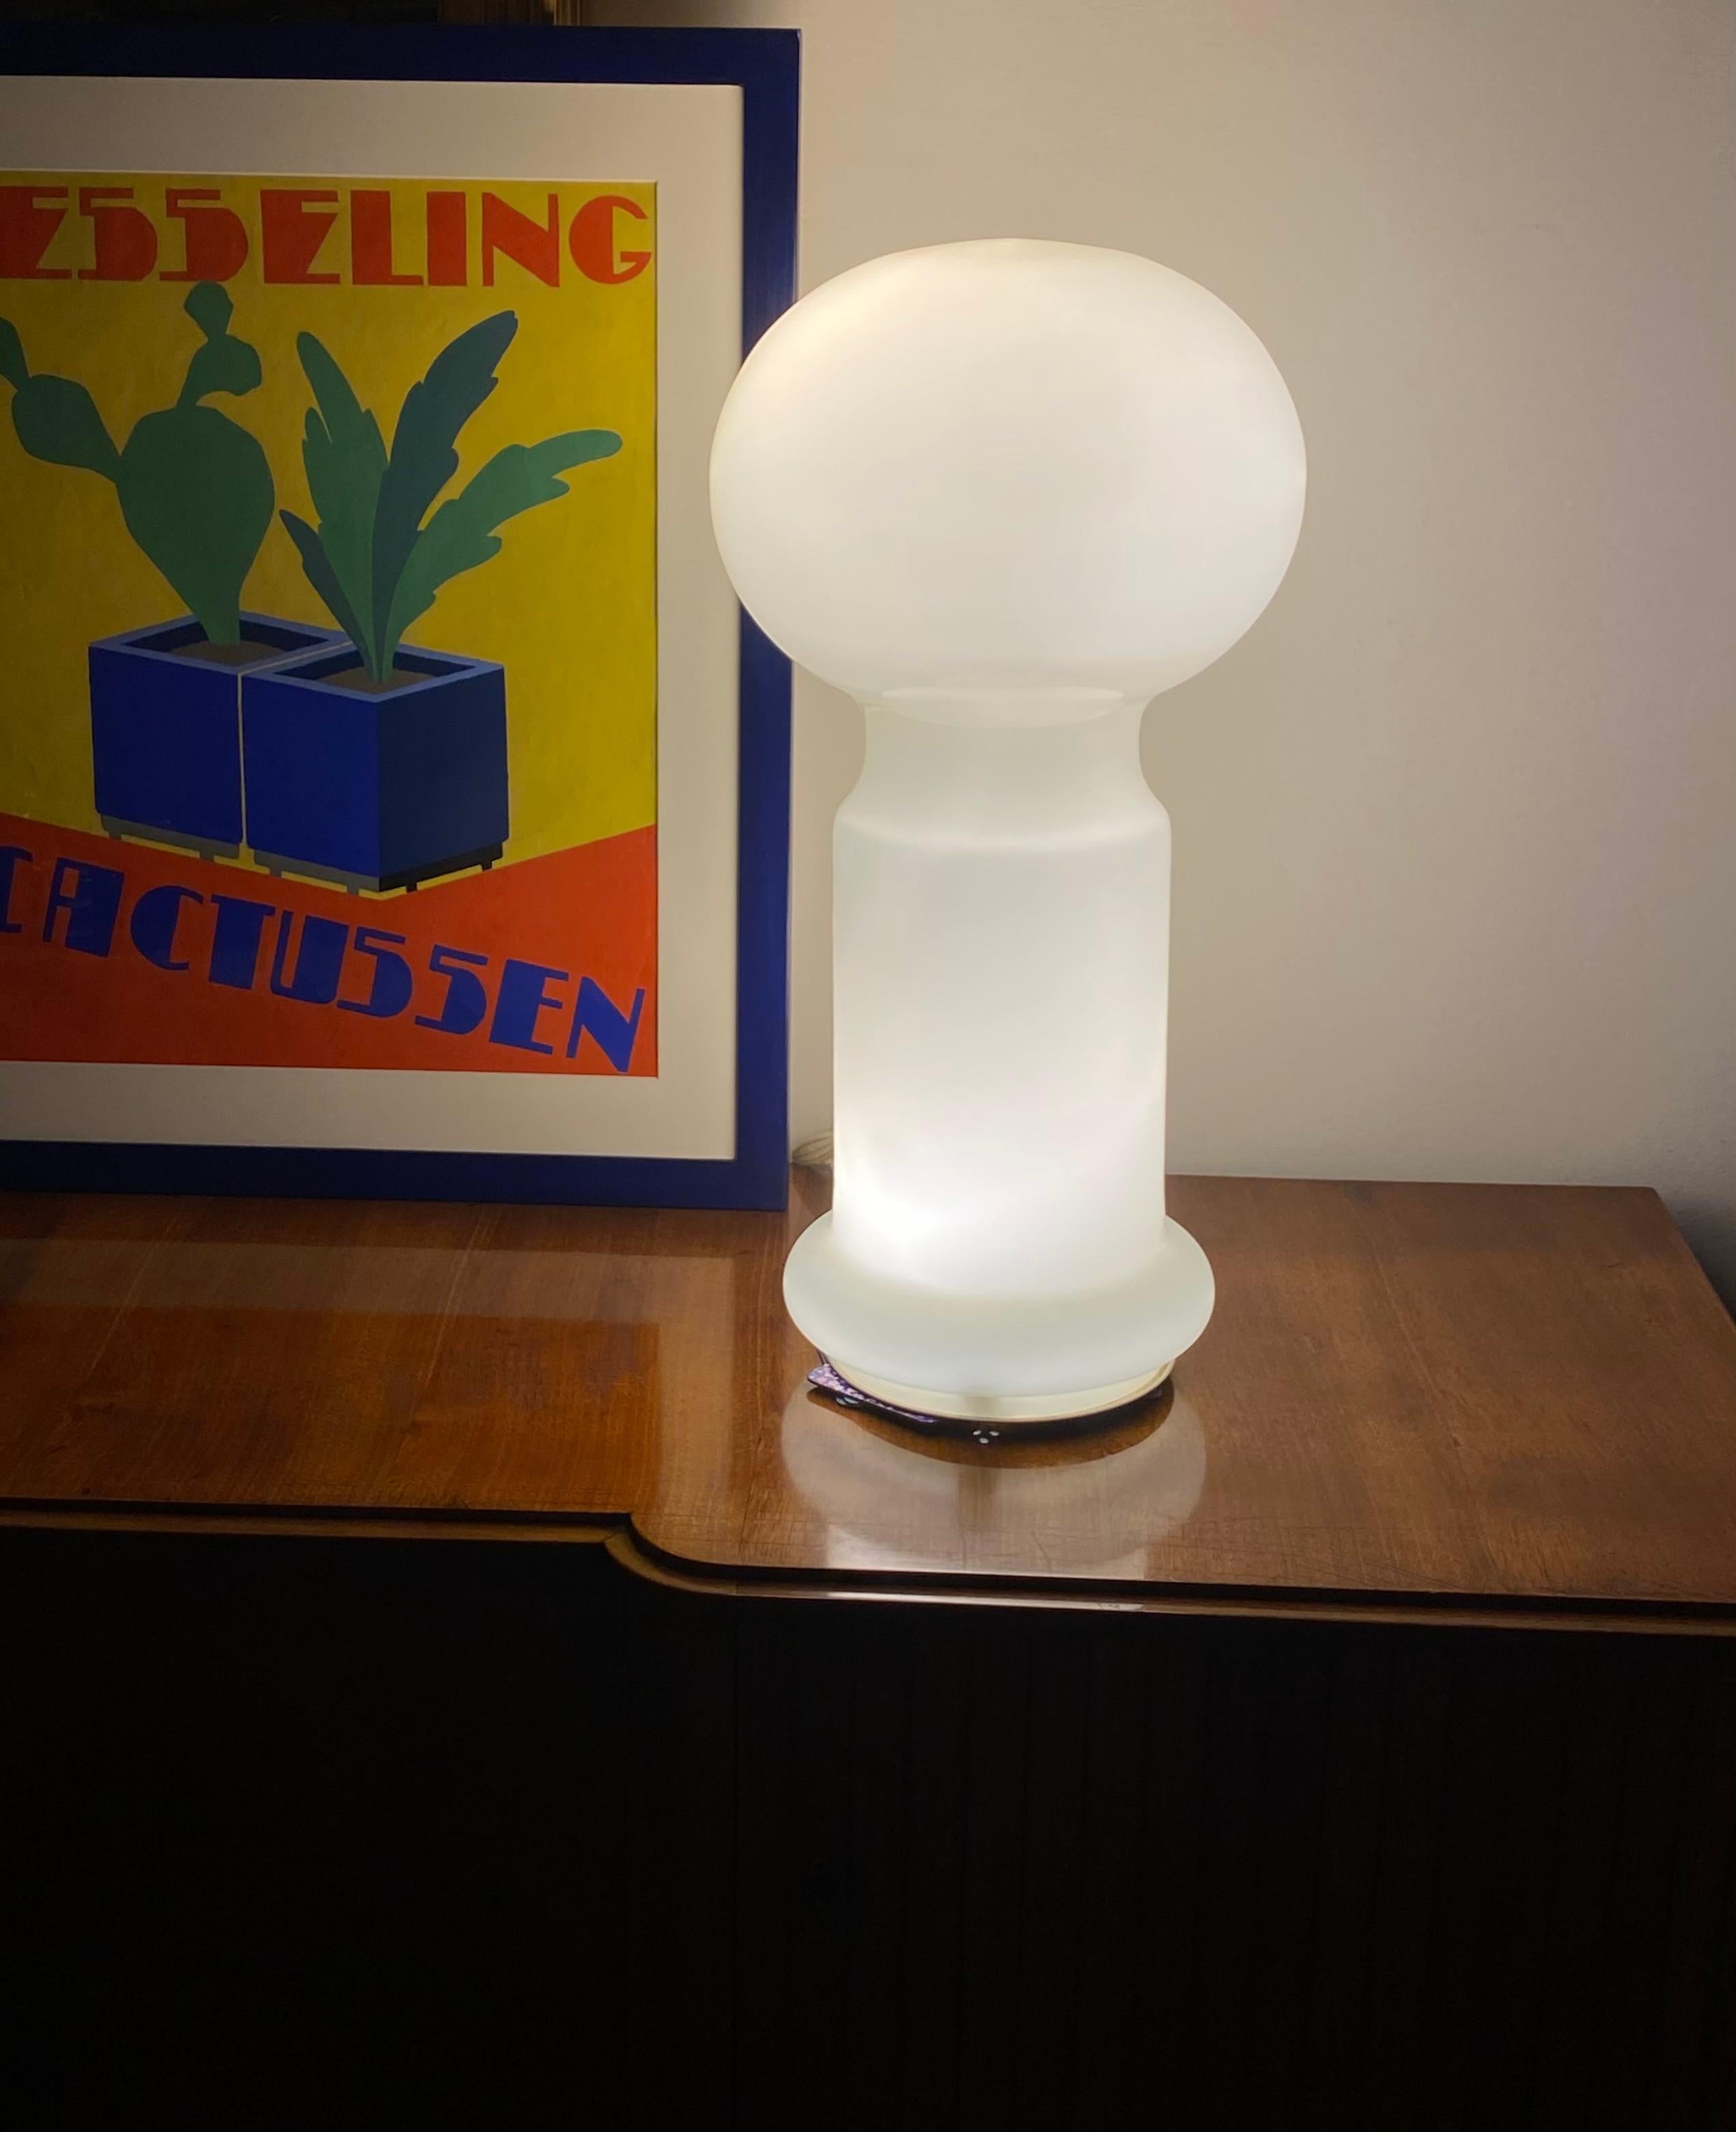 Space Age Murano glass table lamp.

Vistosi, Italy 1960s

Pale yellow / beige glass. 

Three bulbs inside; a large one with E27 socket at the top and two E14 bulbs on the base.

H 62 cm - 33 cm diam.

Conditions: excellent, no defects. In working